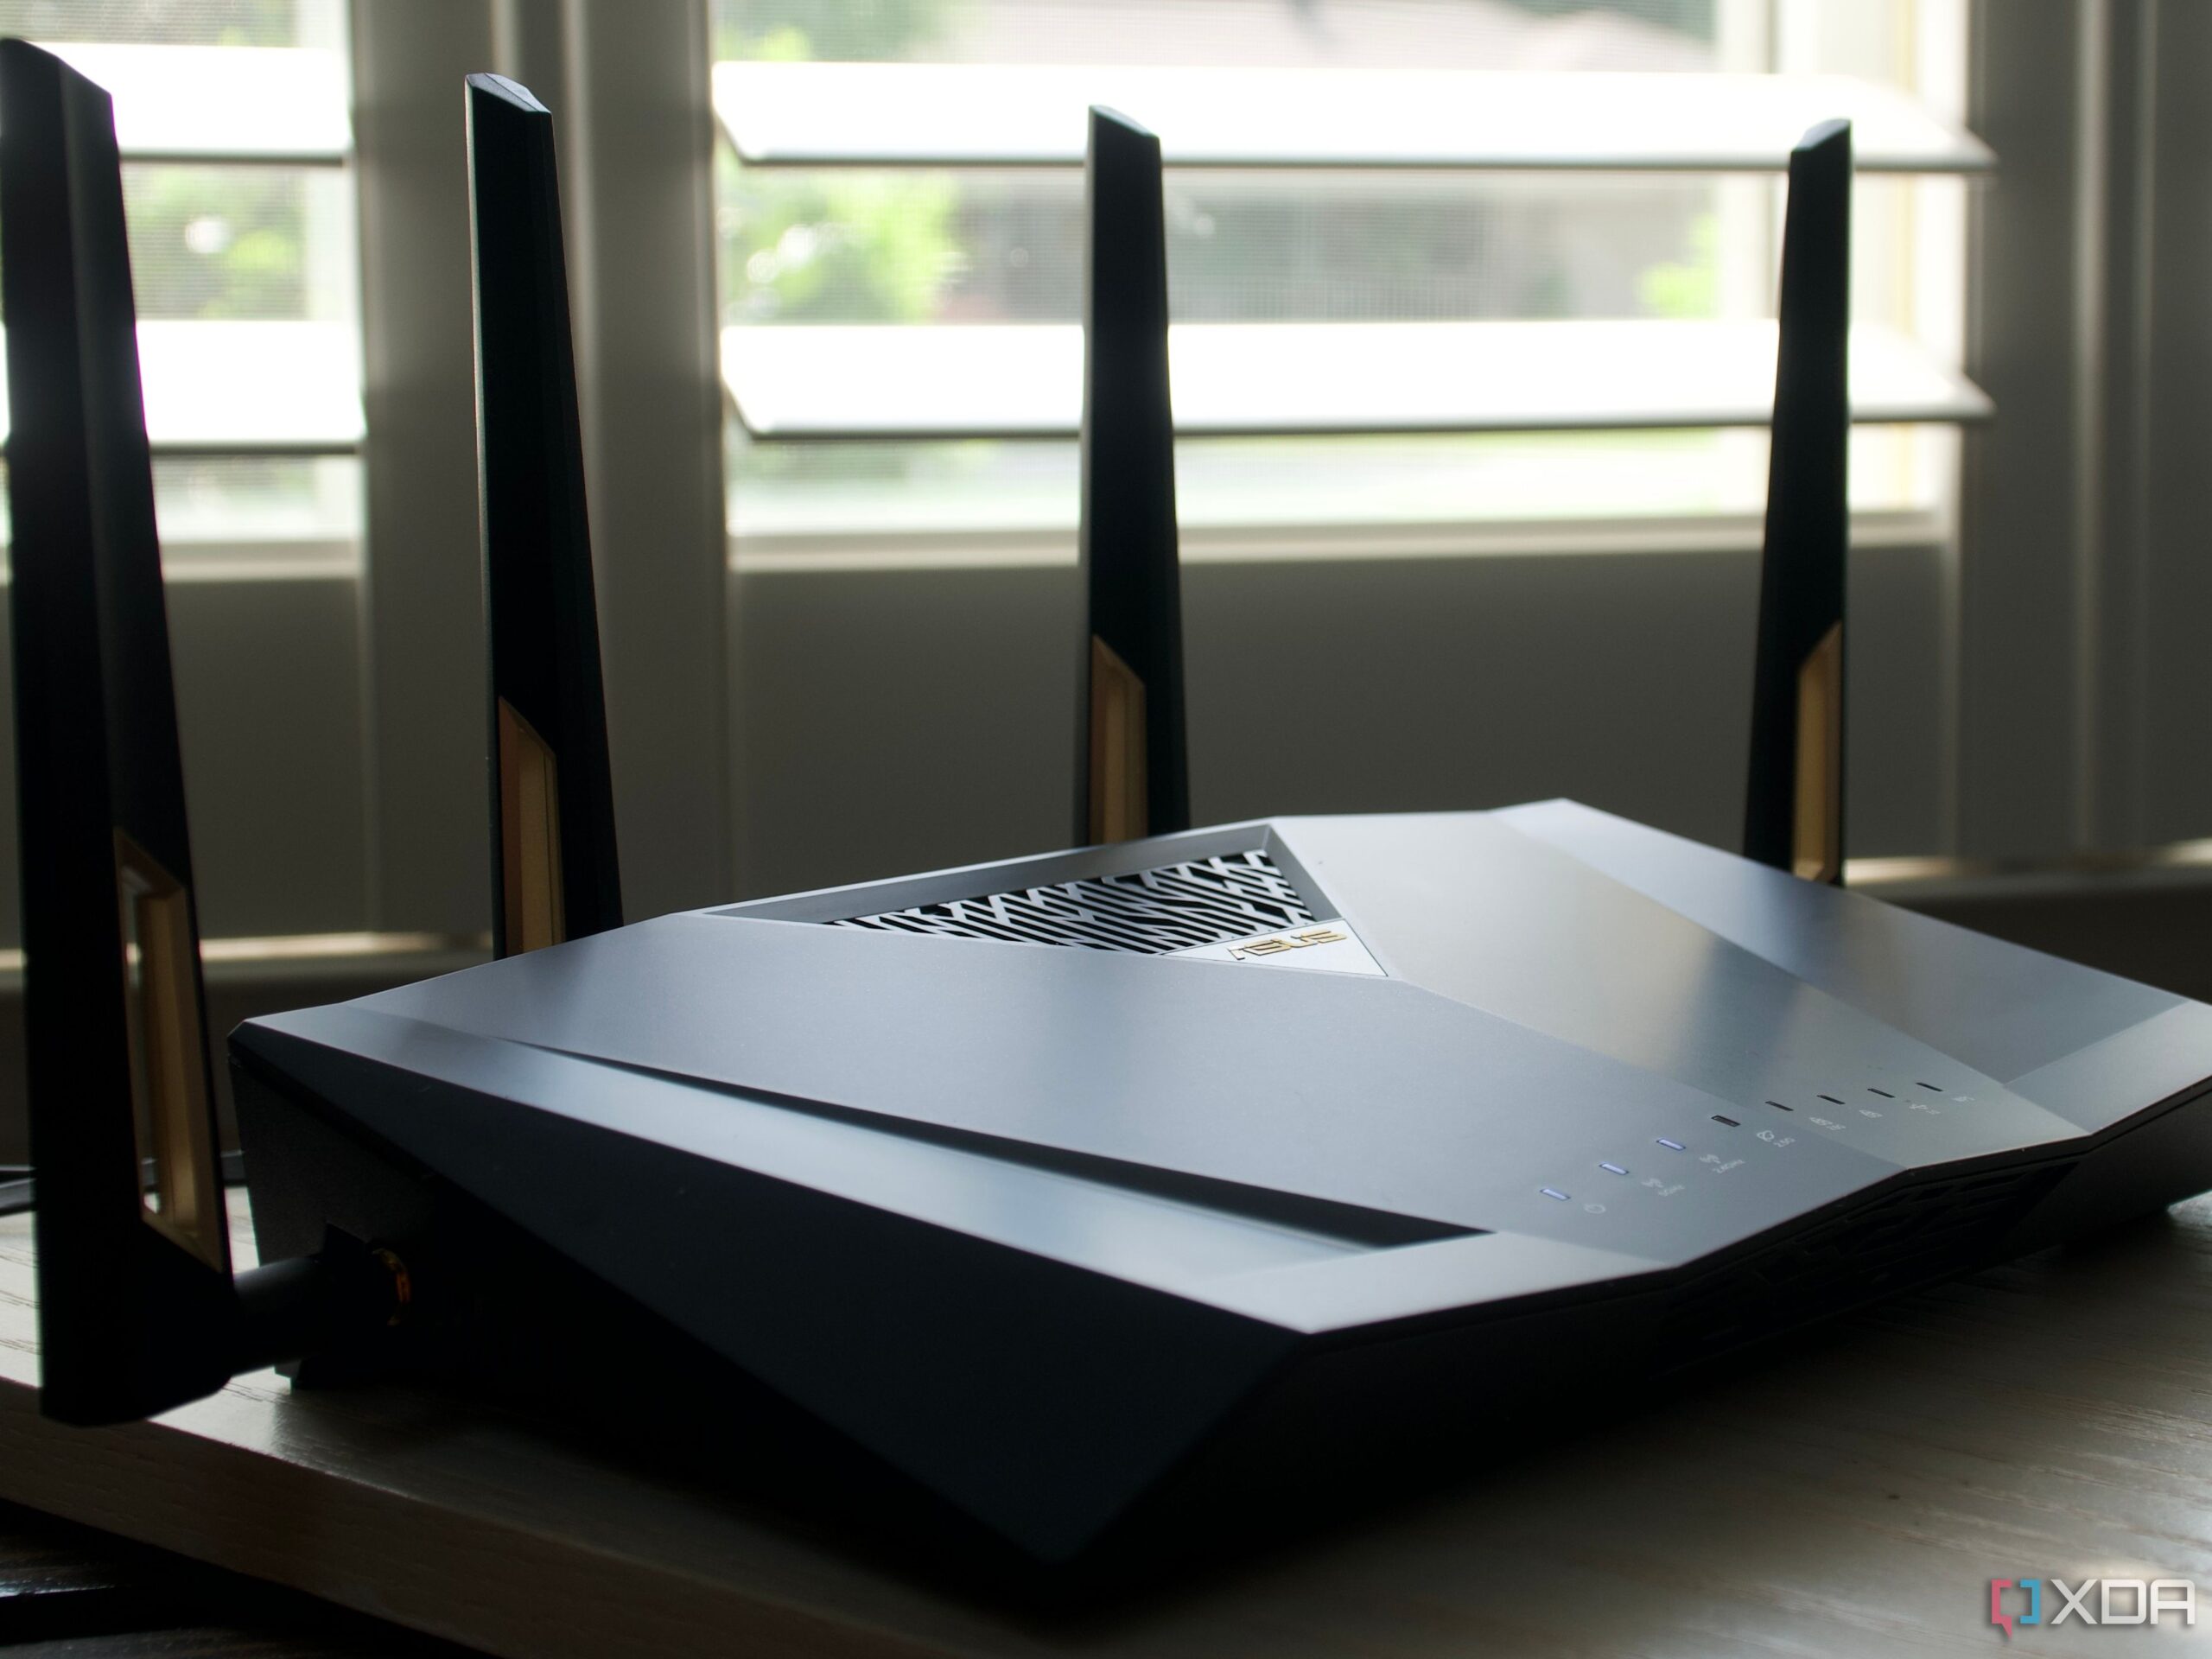 asus-rt-ax88u-pro-review:-a-powerful-gaming-router-that-can-handle-almost-anything-else